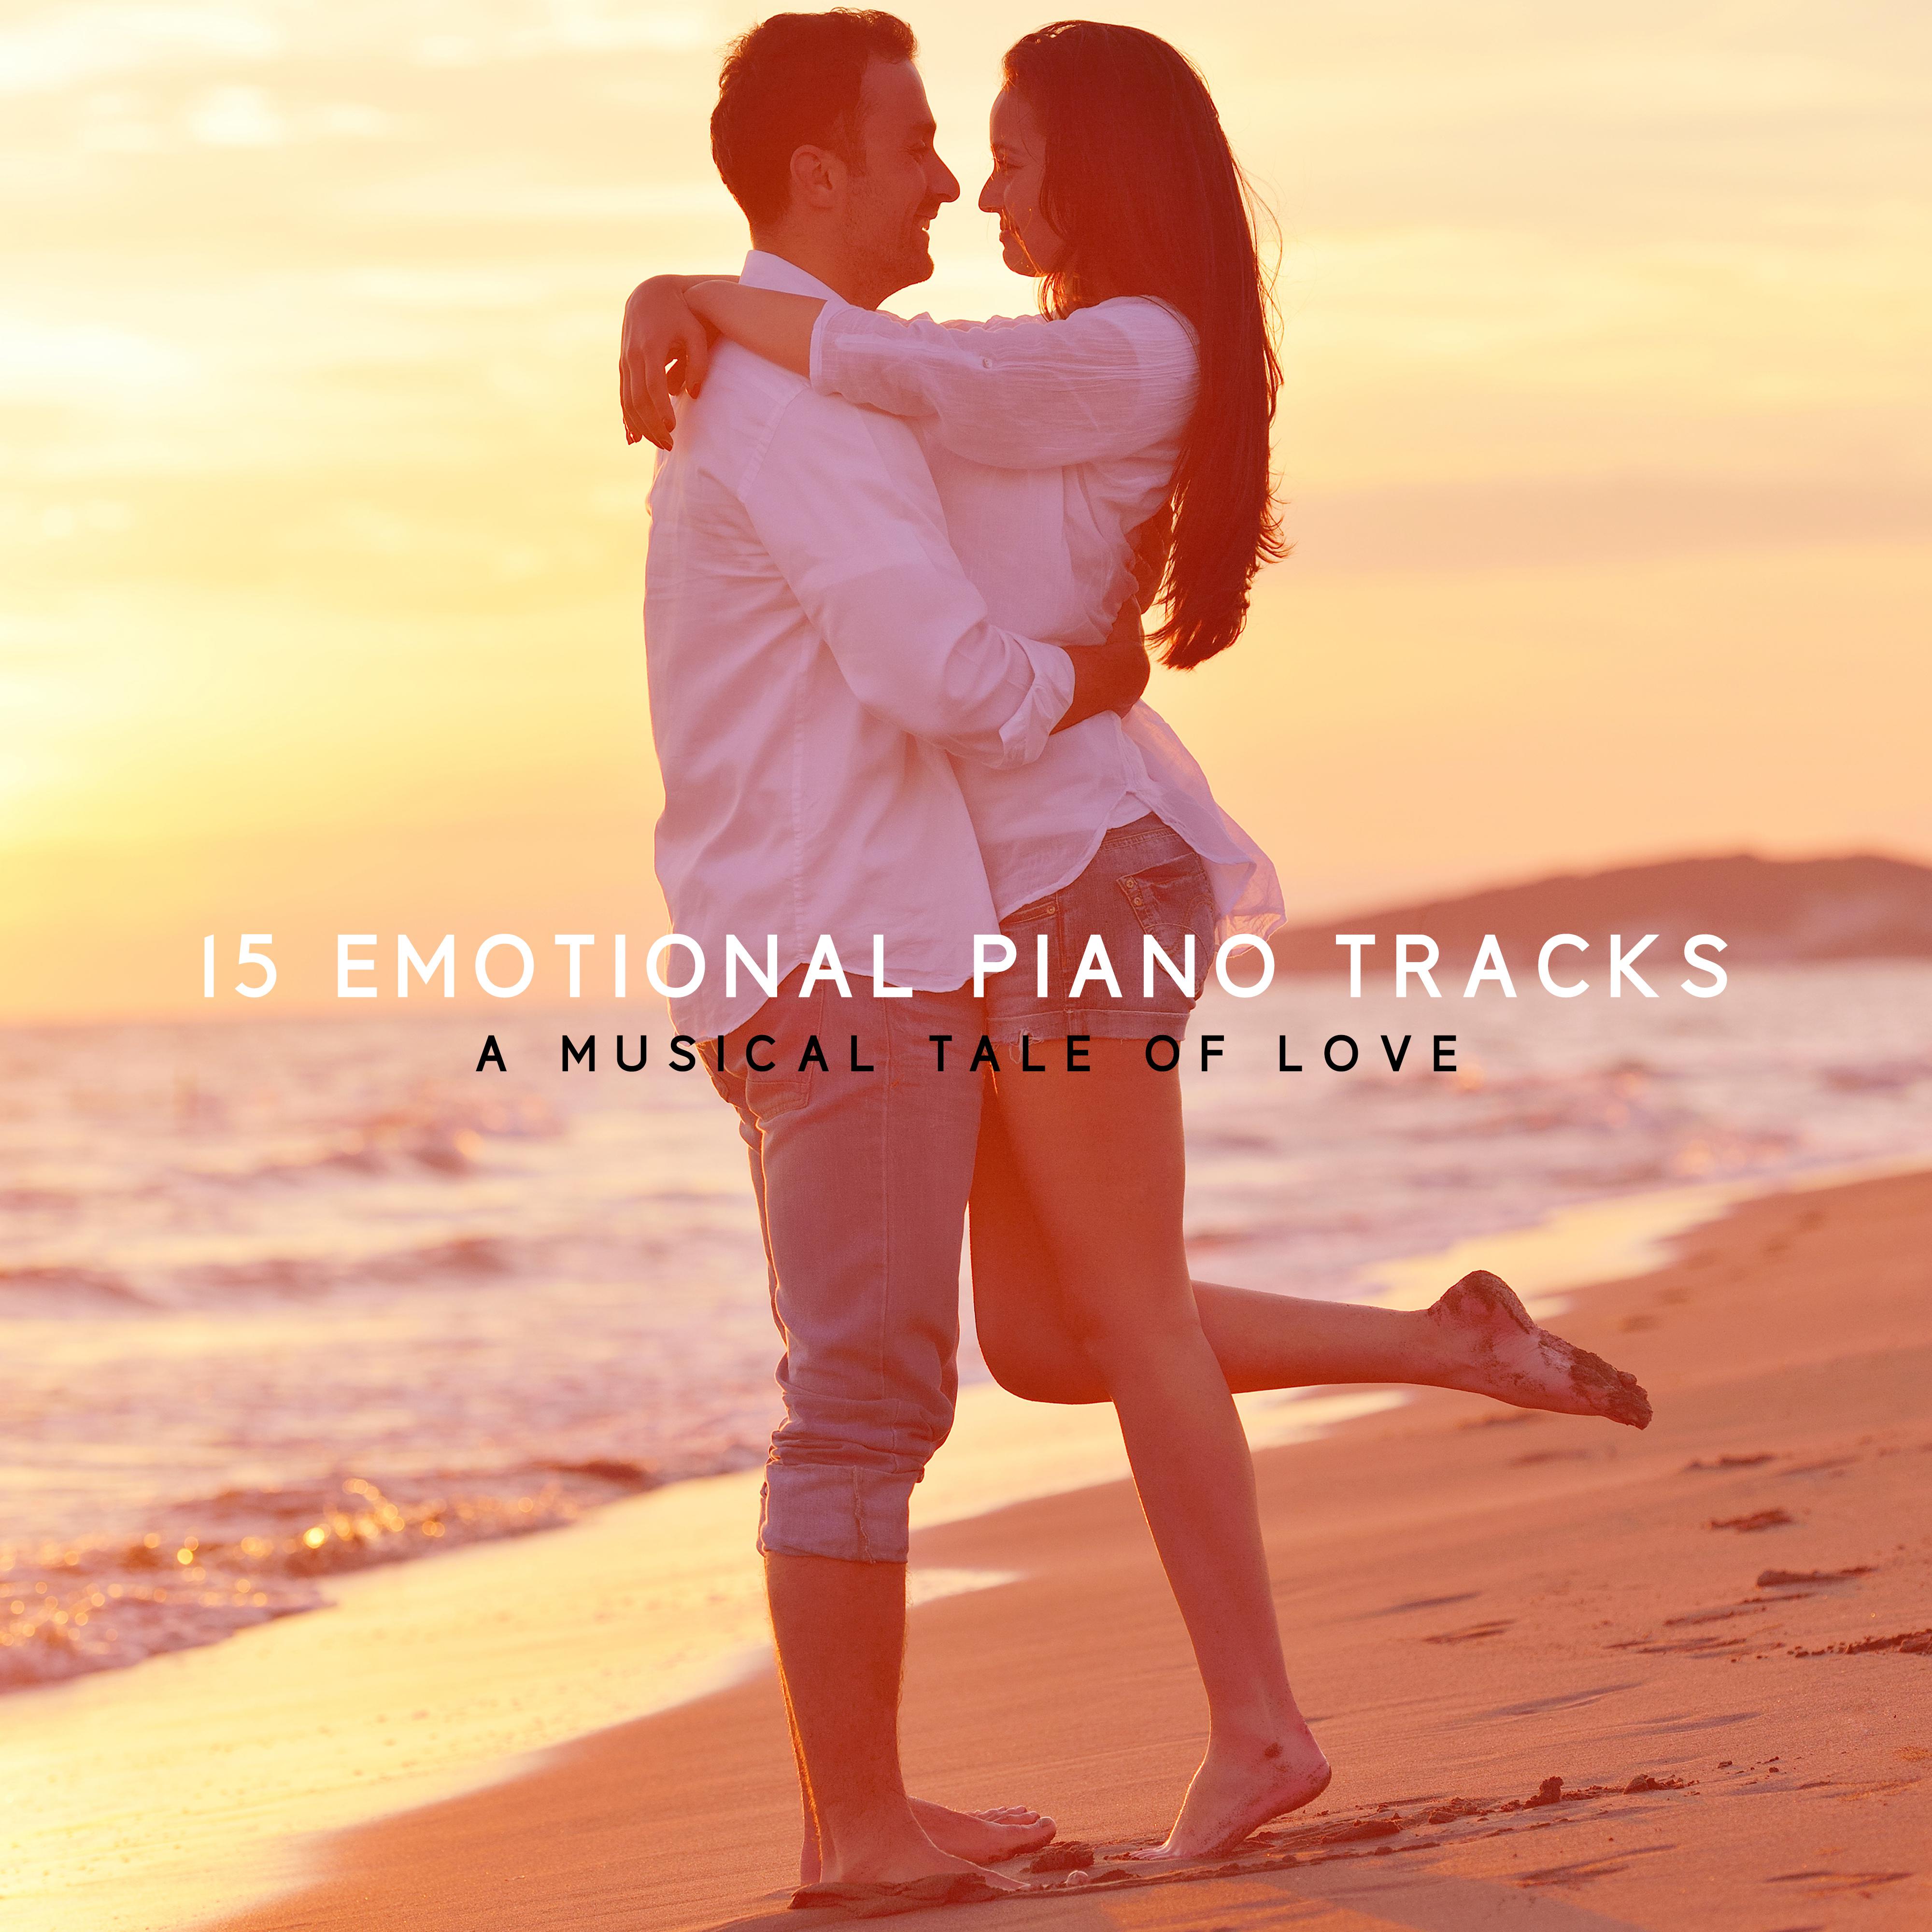 15 Emotional Piano Tracks - A Musical Tale of Love